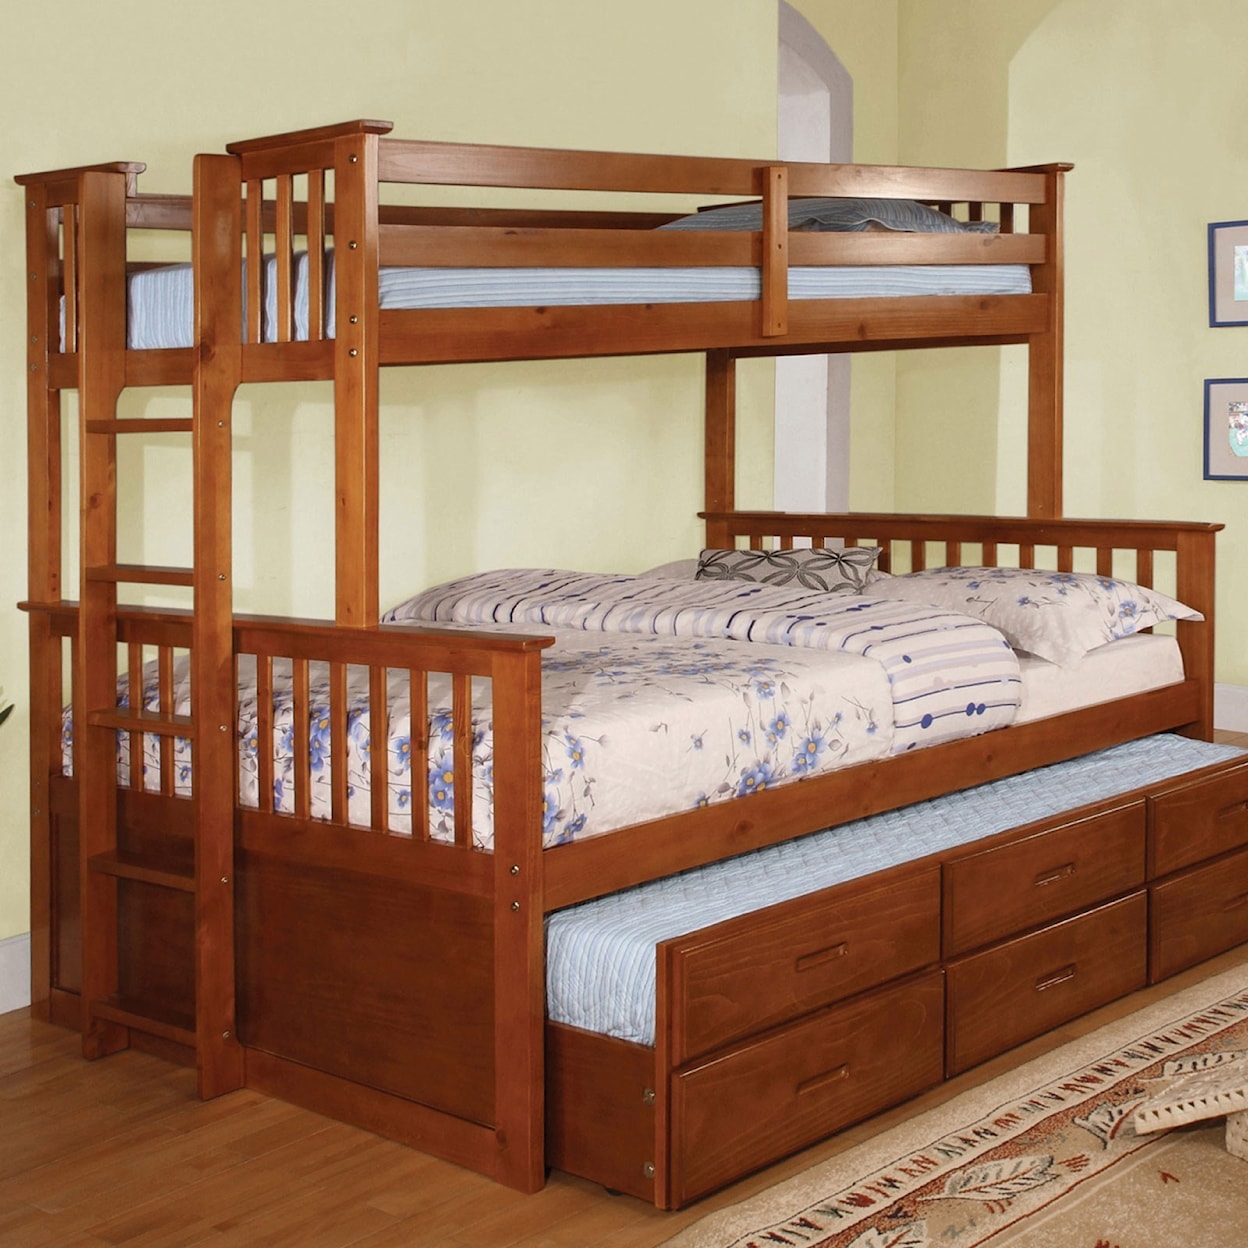 FUSA University Twin-over-Full Bunk Bed and Trundle